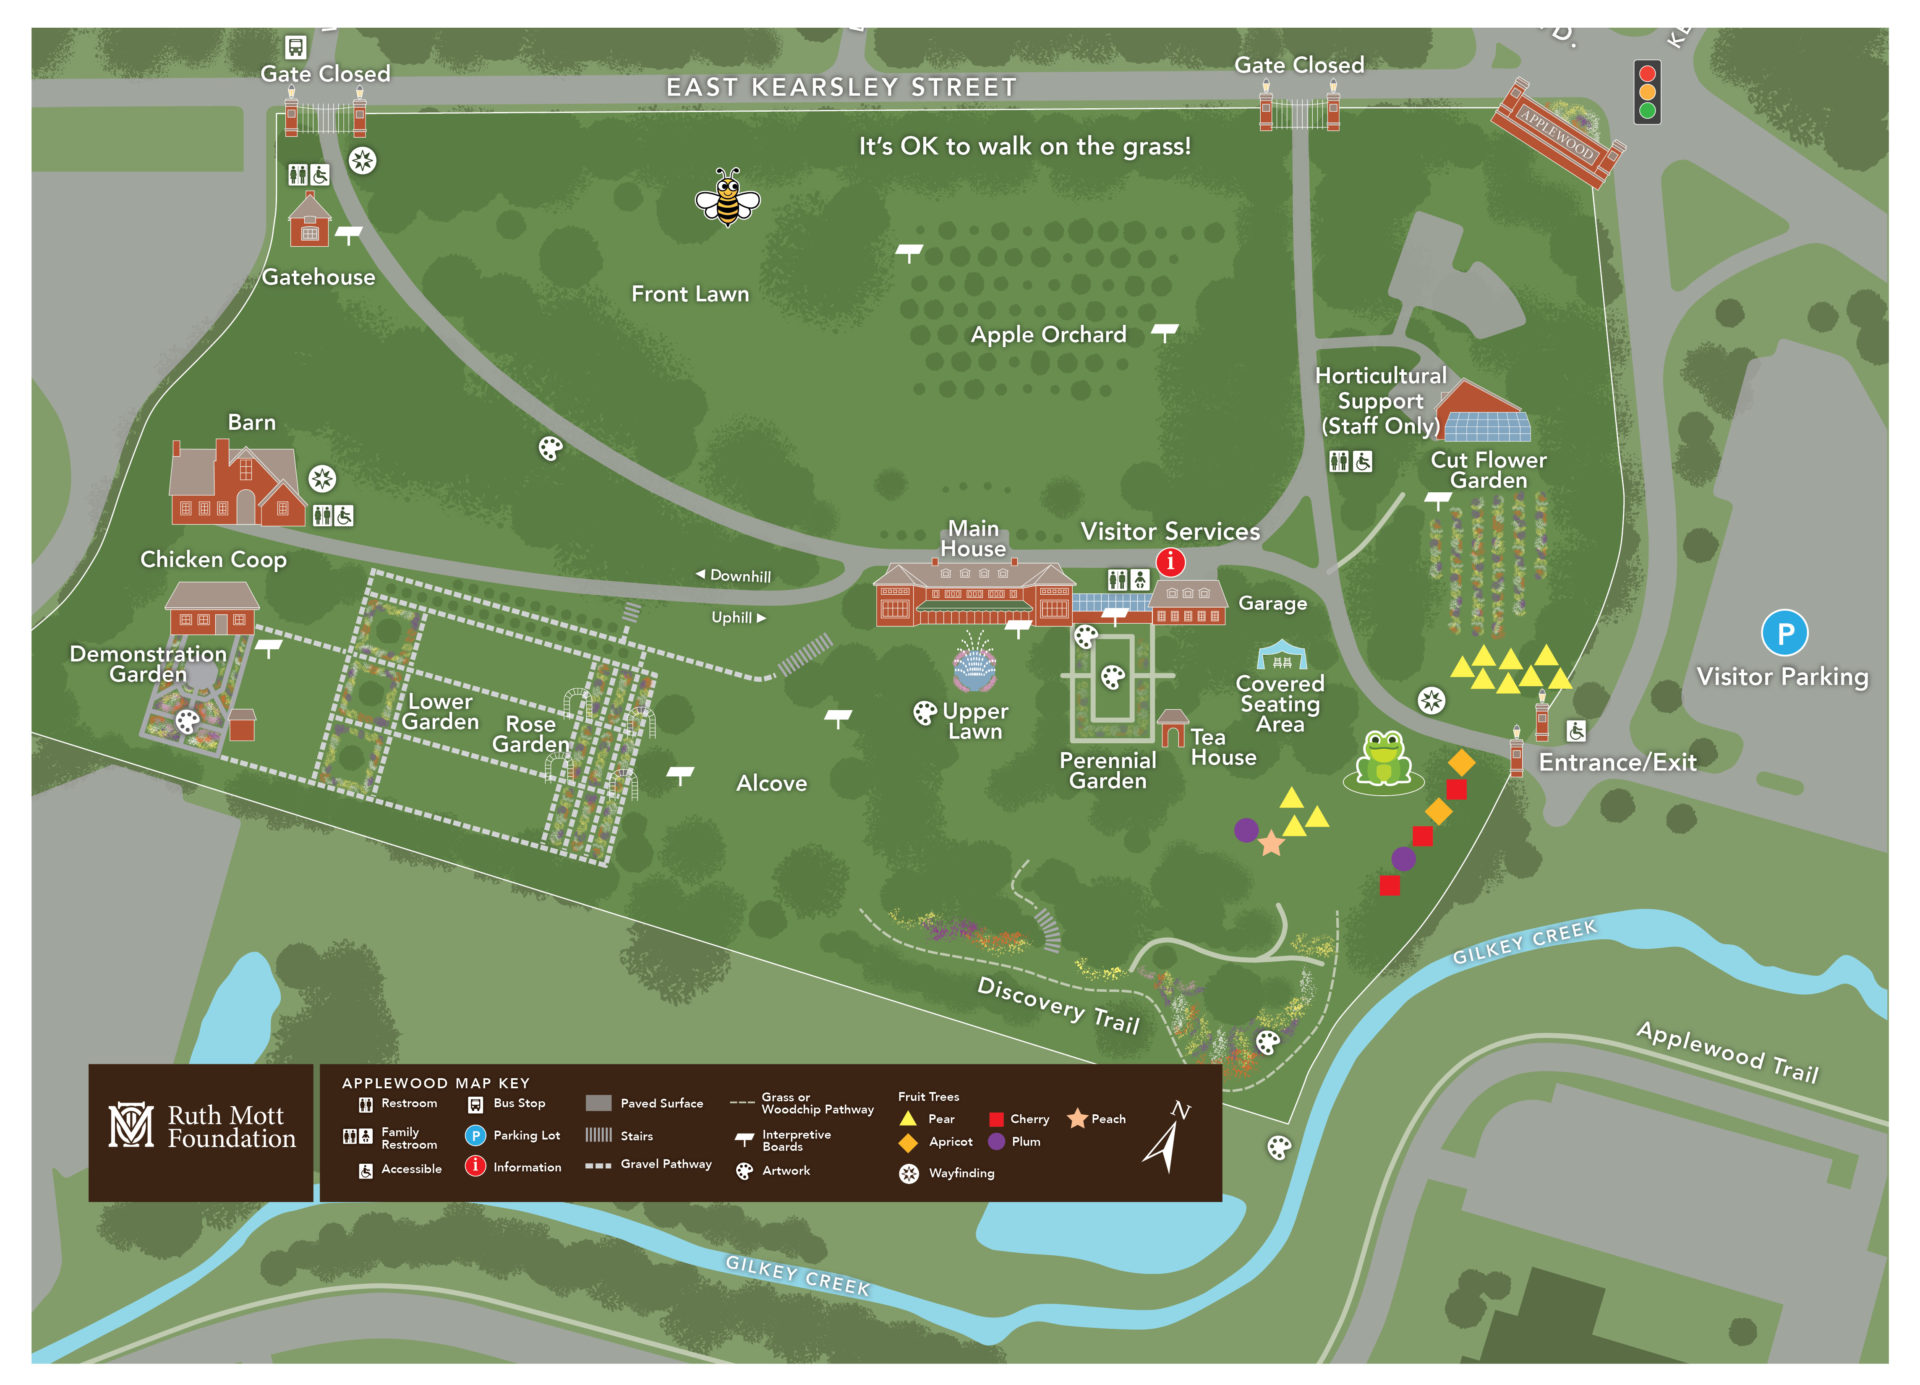 A digital map of the grounds of Applewood Estate, including walking paths, historic buildings, gardens and other highlights.